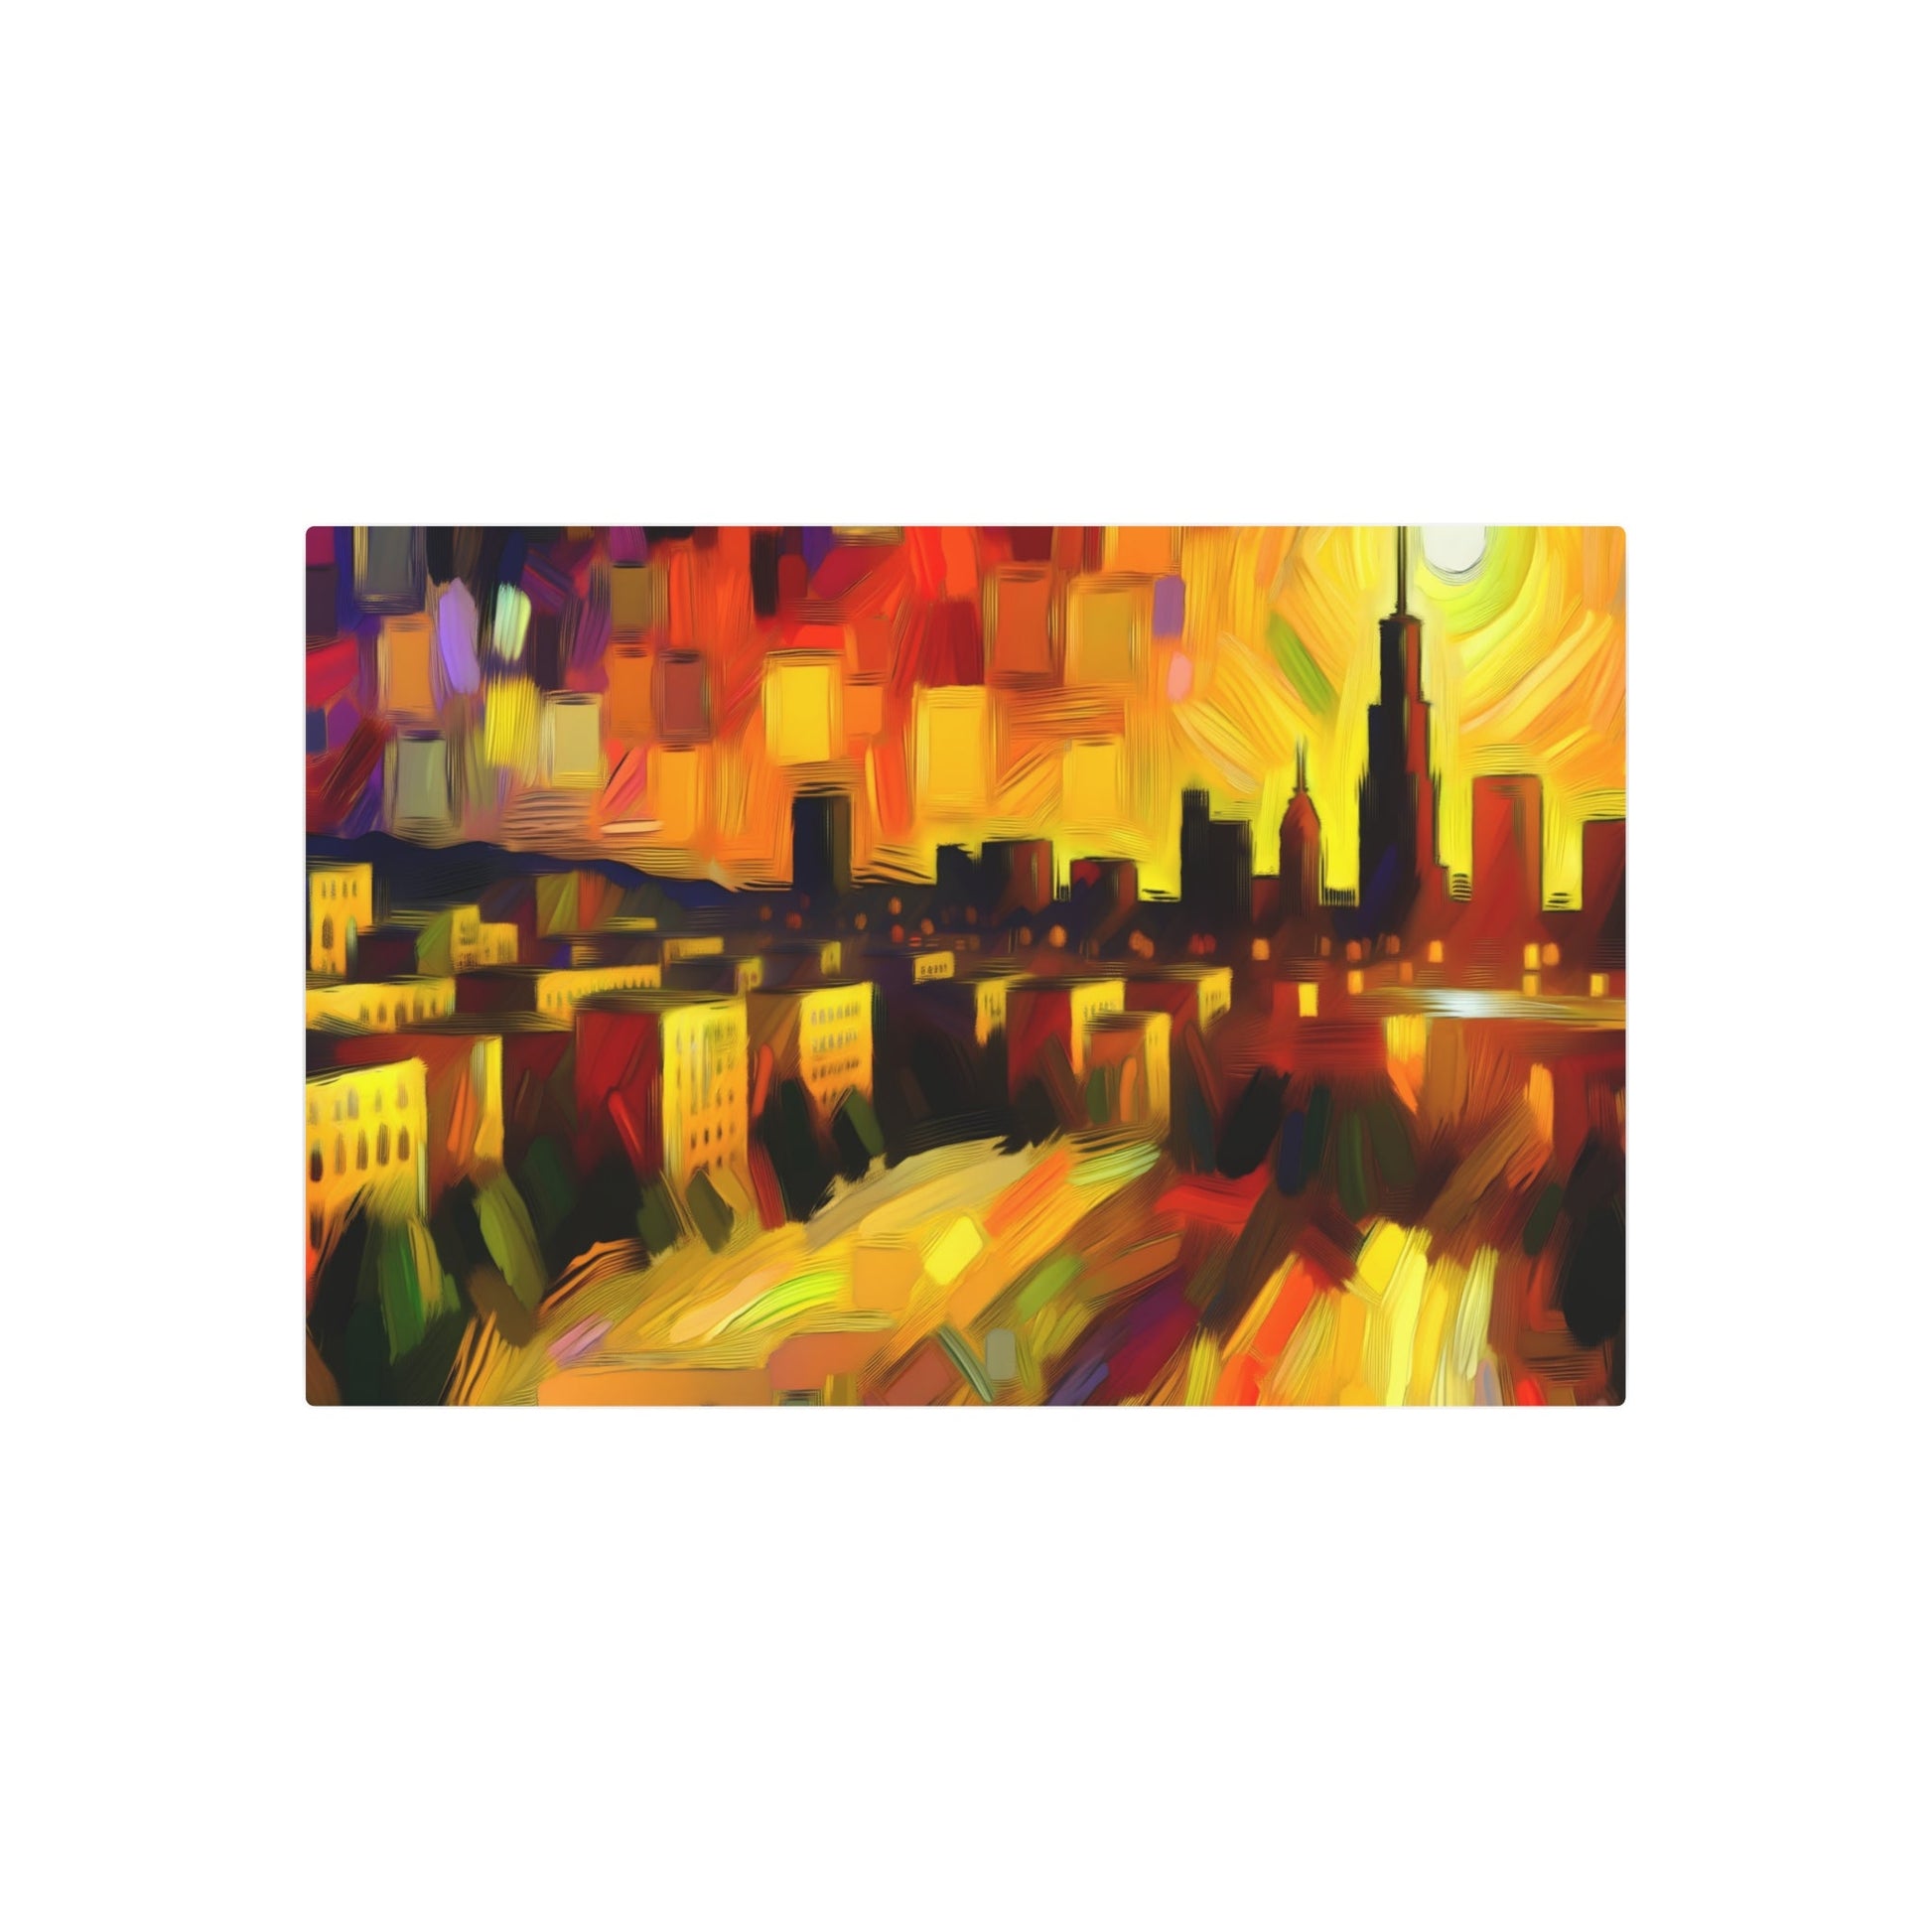 Metal Poster Art | "Expressionist Western Art Style: Emotional Cityscape at Sunset Artwork" - Metal Poster Art 36″ x 24″ (Horizontal) 0.12''